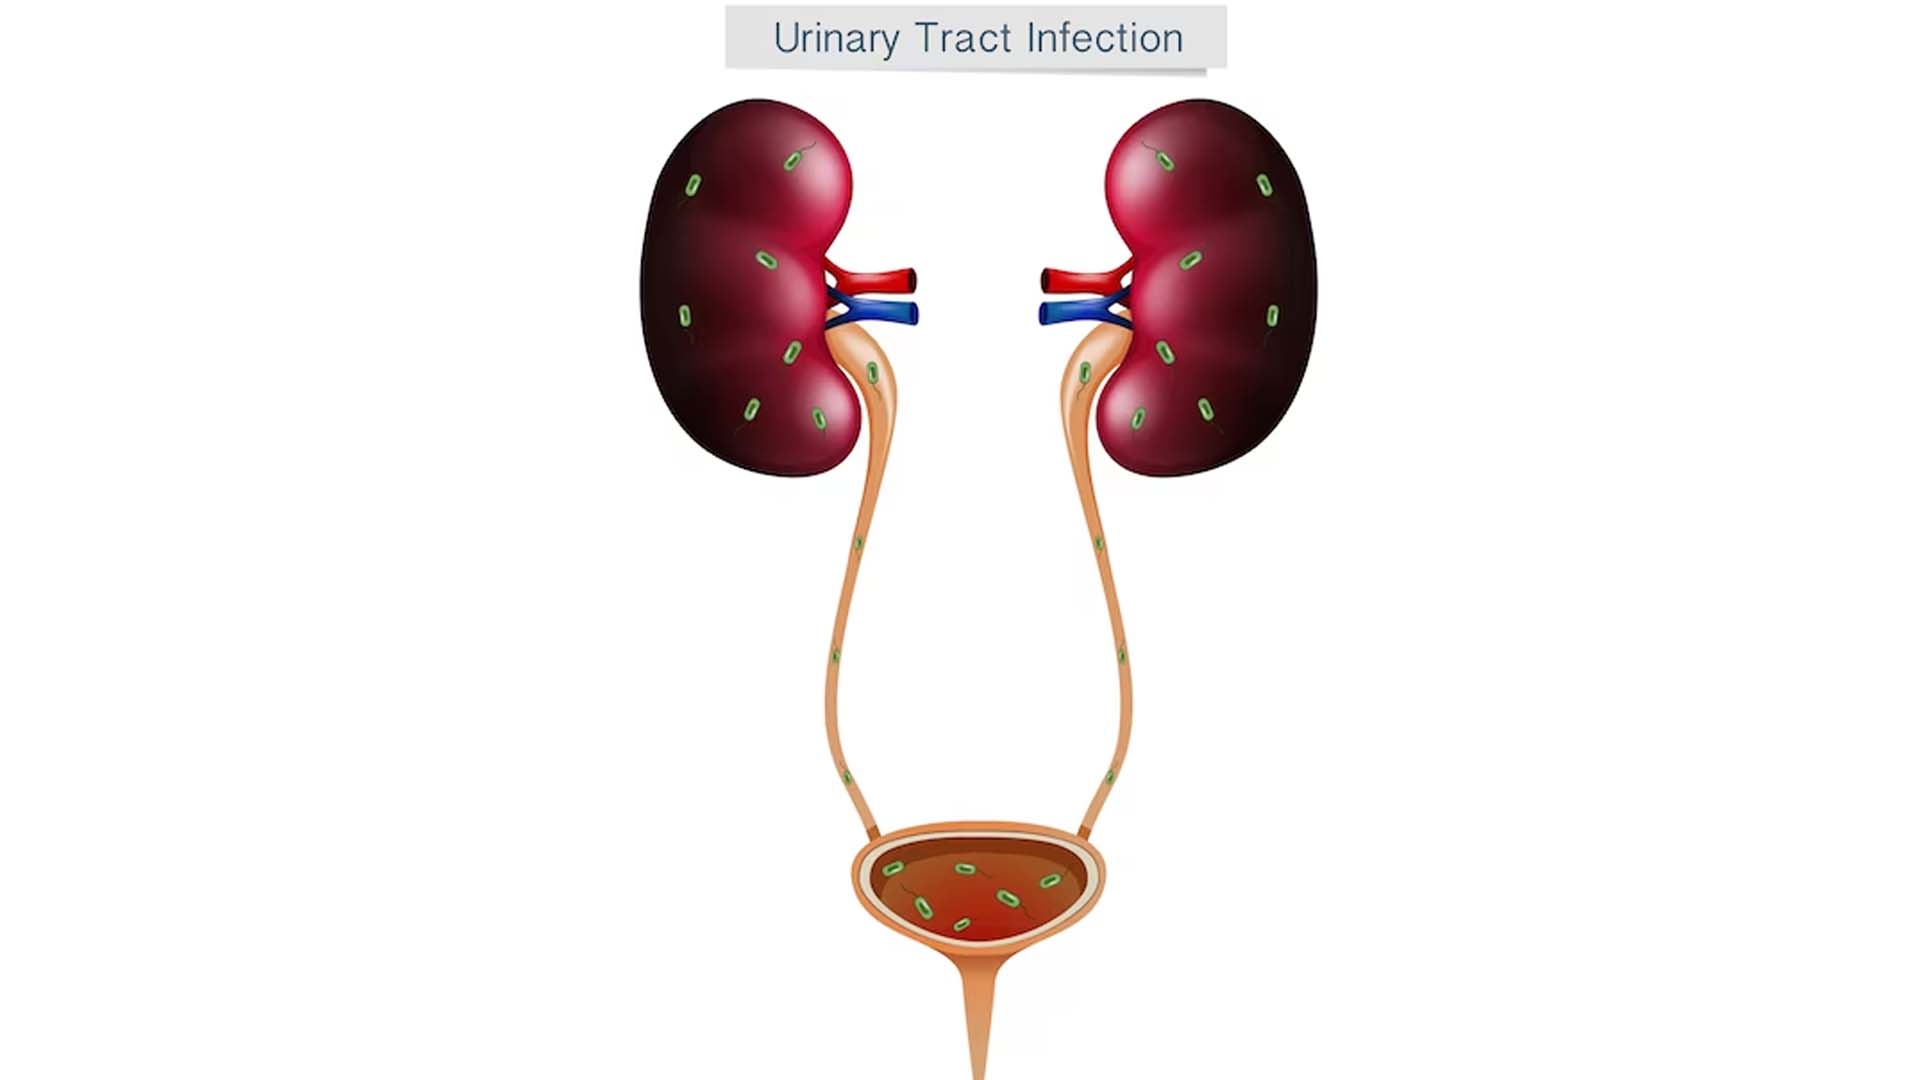 urinary tract infection (UTI)